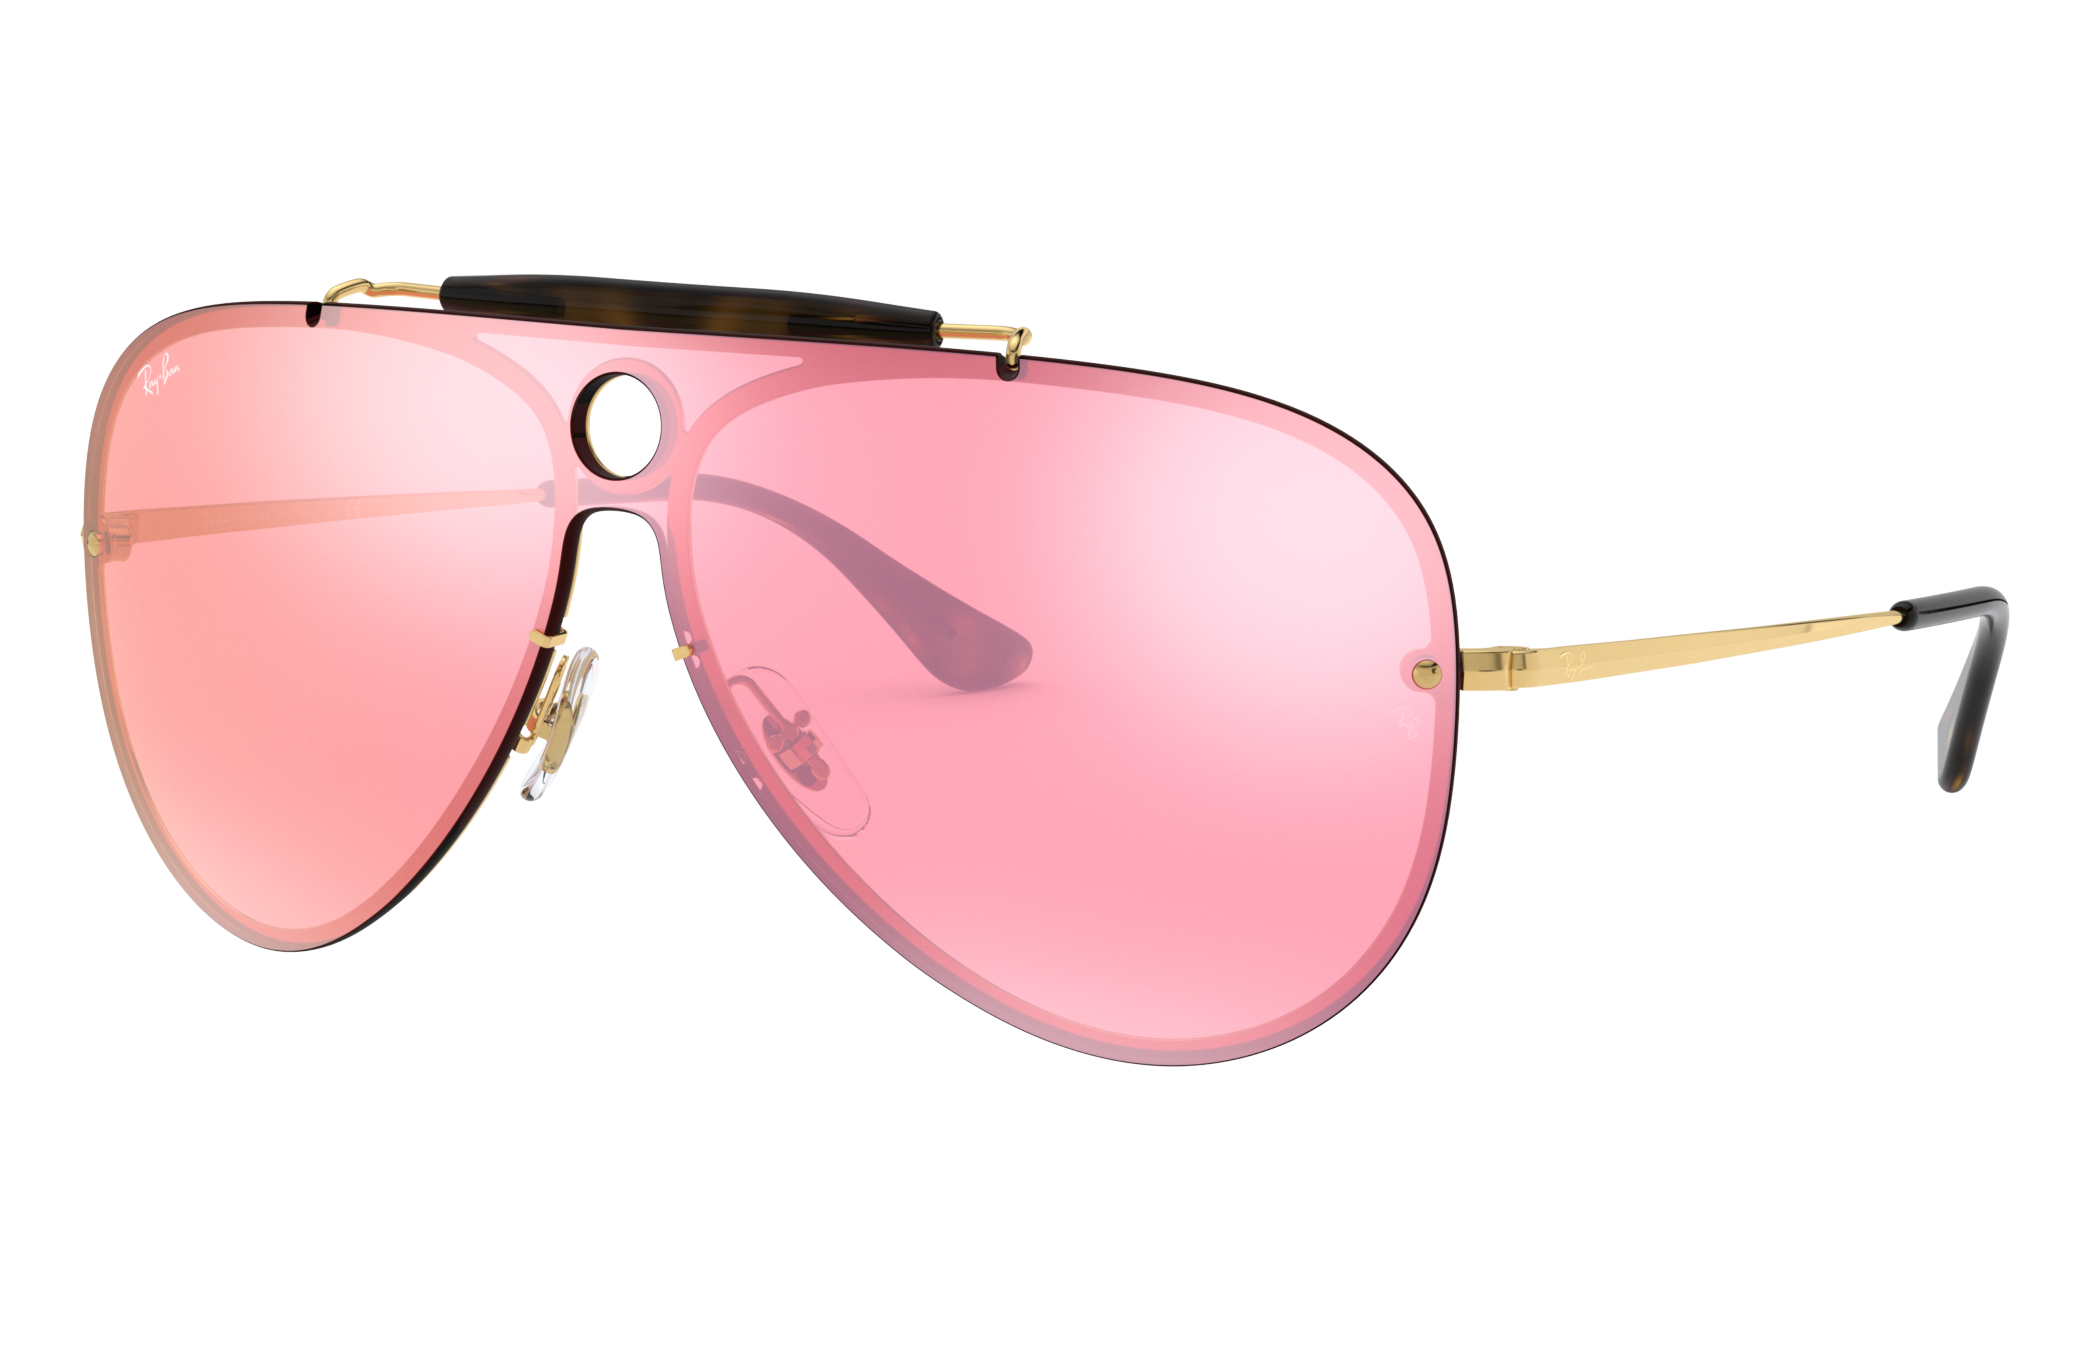 Blaze Shooter Sunglasses in Gold and Pink | Ray-Ban®